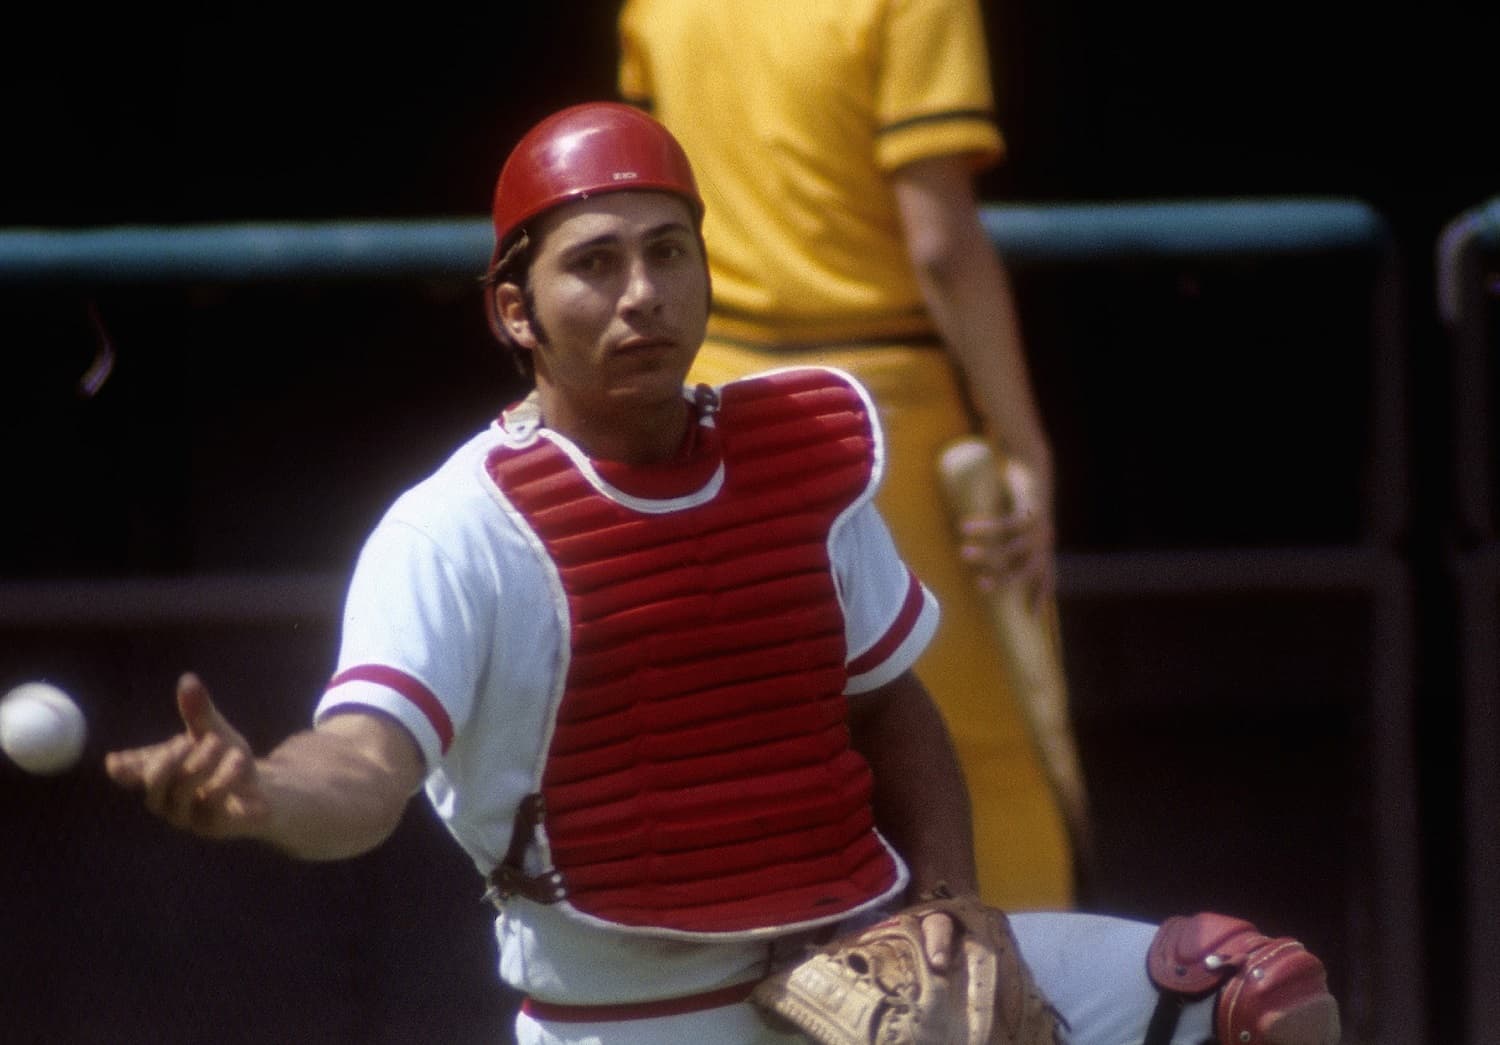 Catcher Johnny Bench of the Cincinnati Reds in action during a MLB baseball game circa 1975 at Riverfront Stadium in Cincinnati, Ohio.